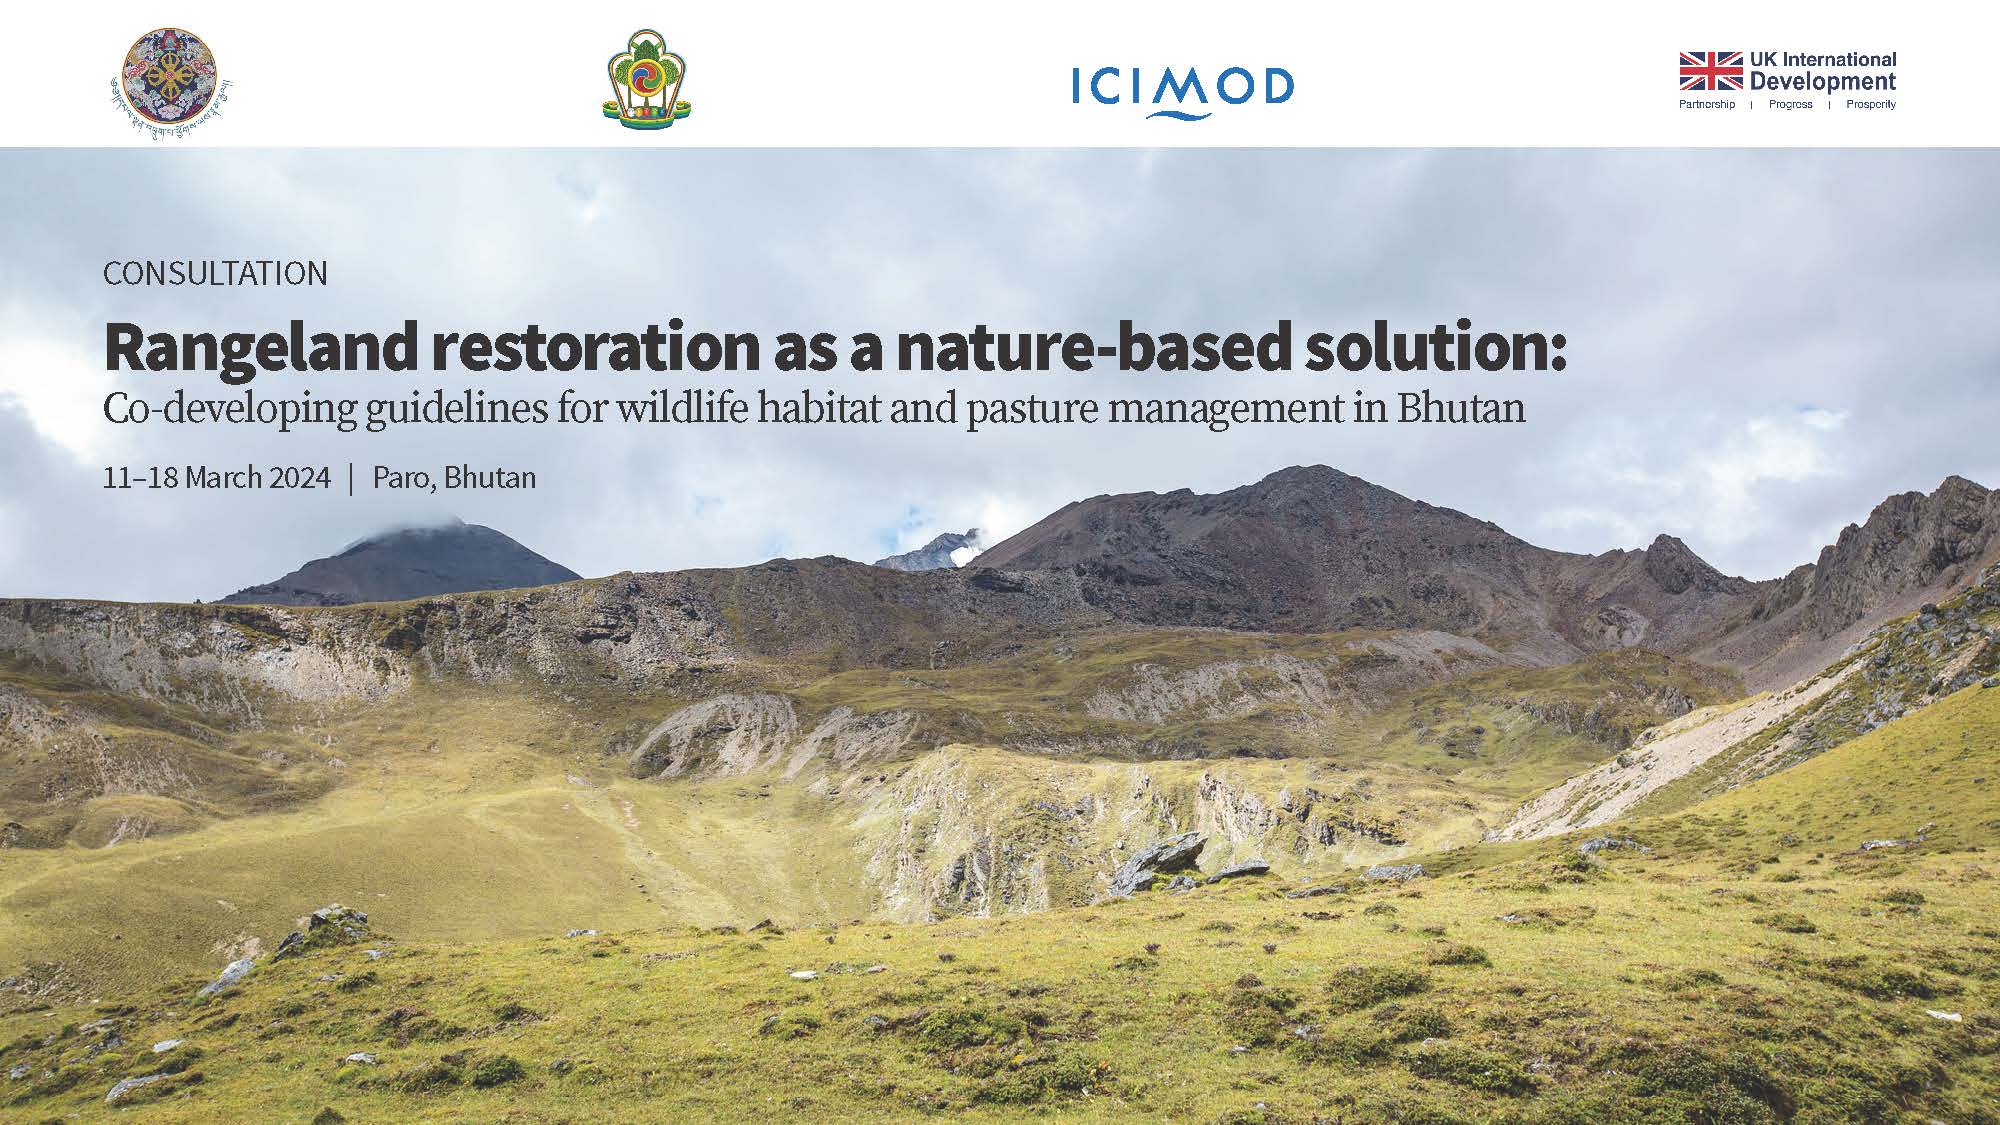 Rangeland restoration as a nature-based solution: Co-developing guidelines for wildlife habitat and pasture management in Bhutan